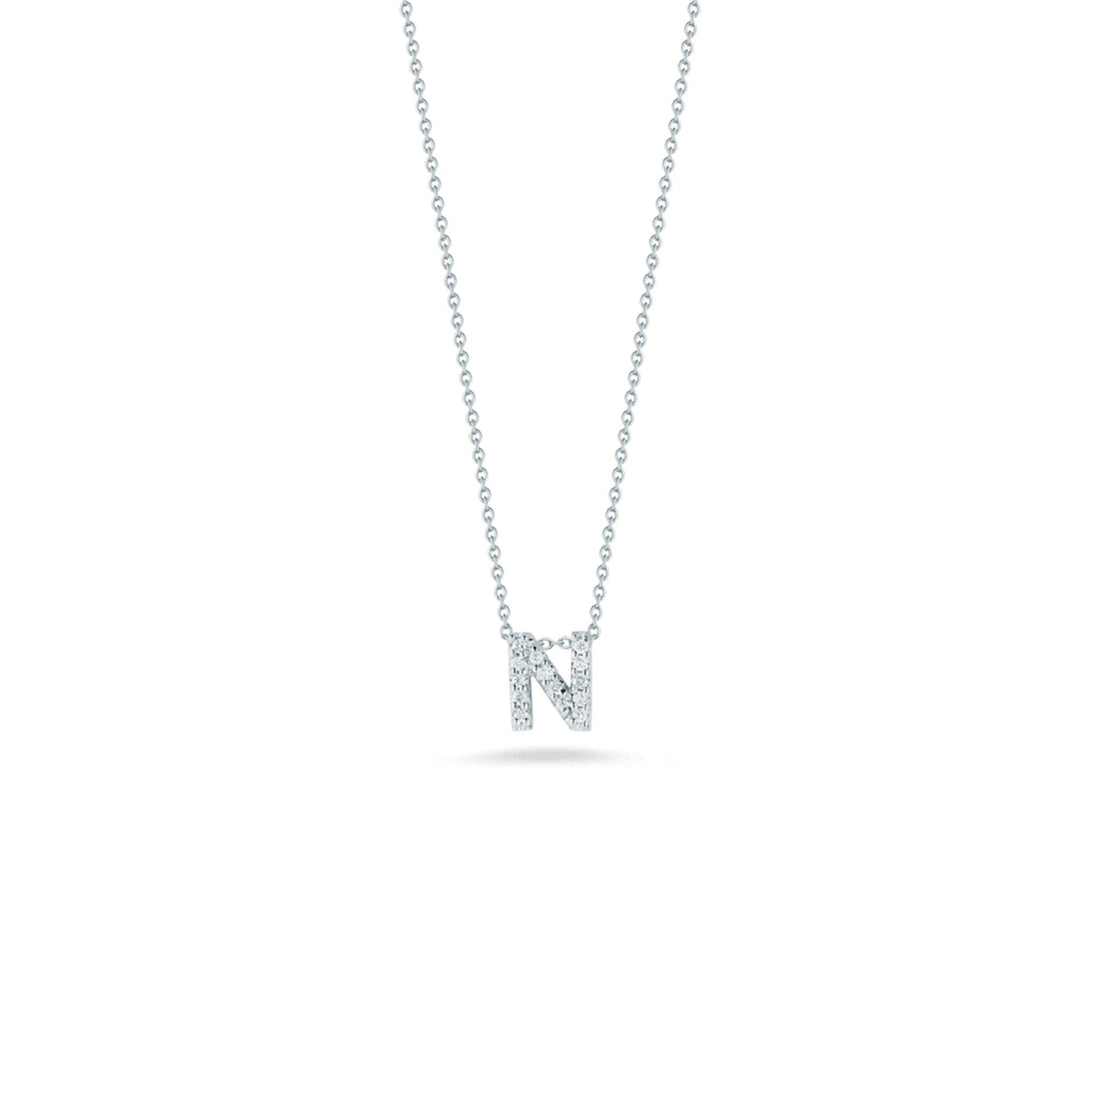 Roberto Coin Diamond Initial Pendant Necklace - Tiny Treasures Collection n